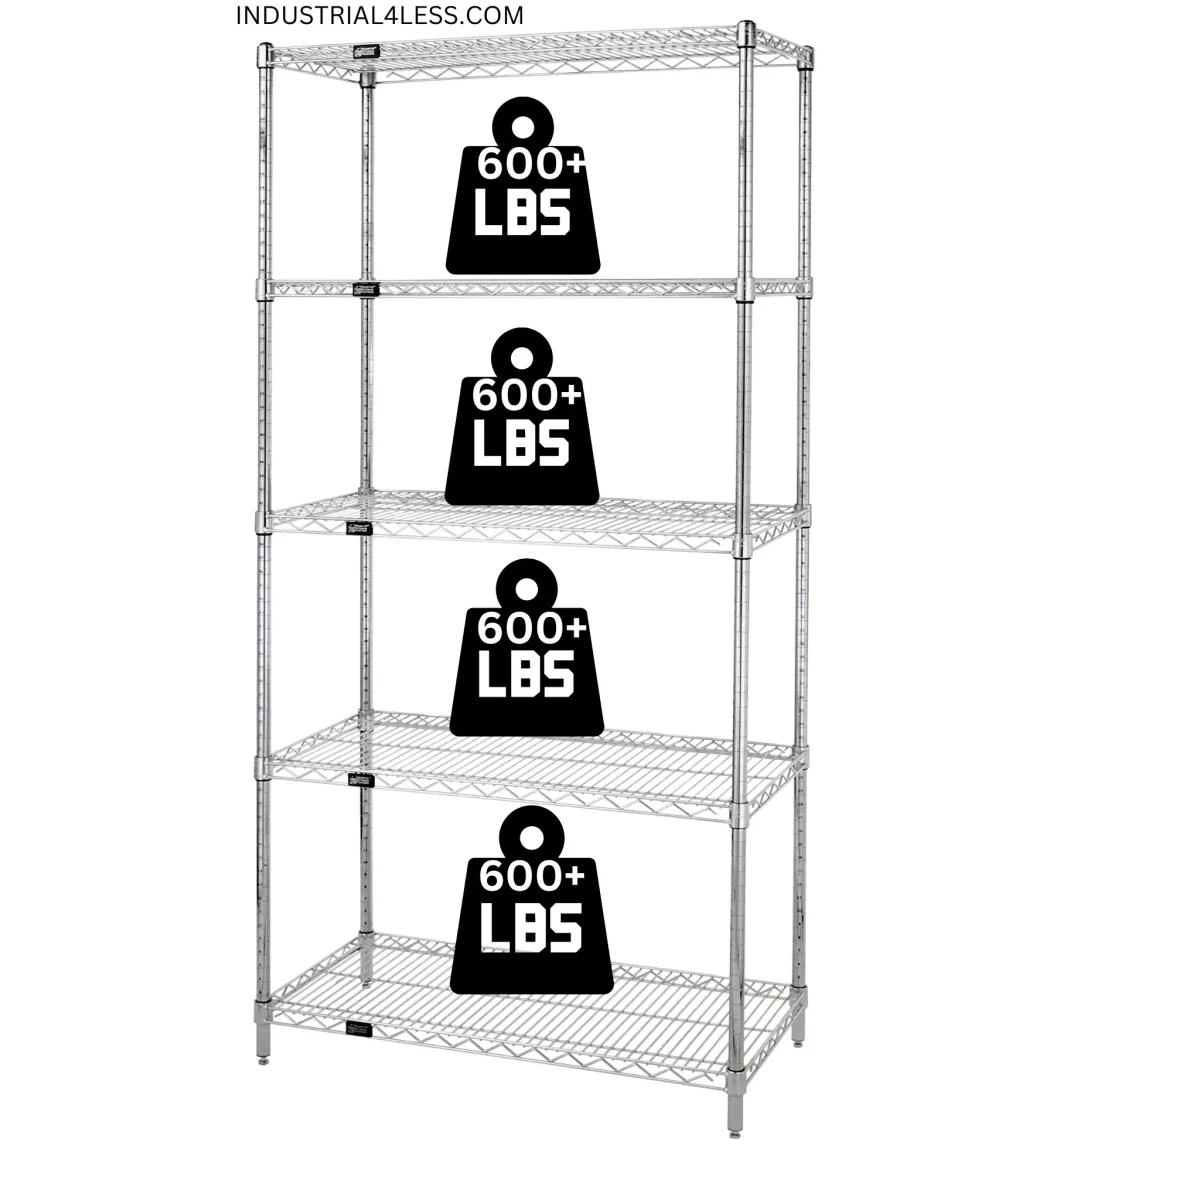 18" x 36" Stainless Steel Wire Shelving Unit - Industrial 4 Less - 18365S-5